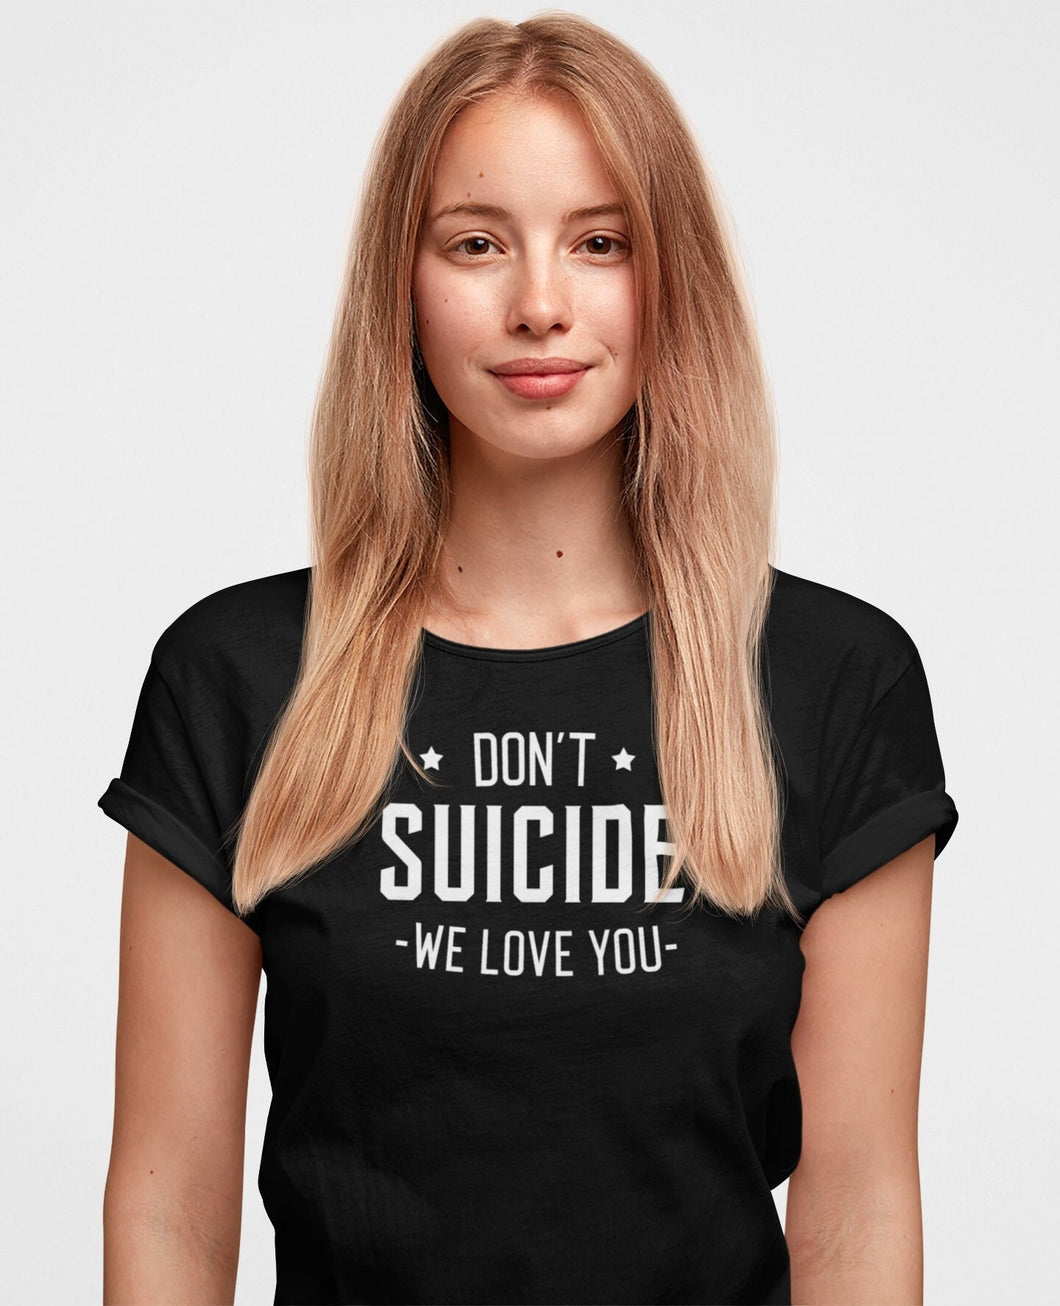 Suicide Awareness Shirt, Suicide Prevention, Suicide Awareness, Depression Gift